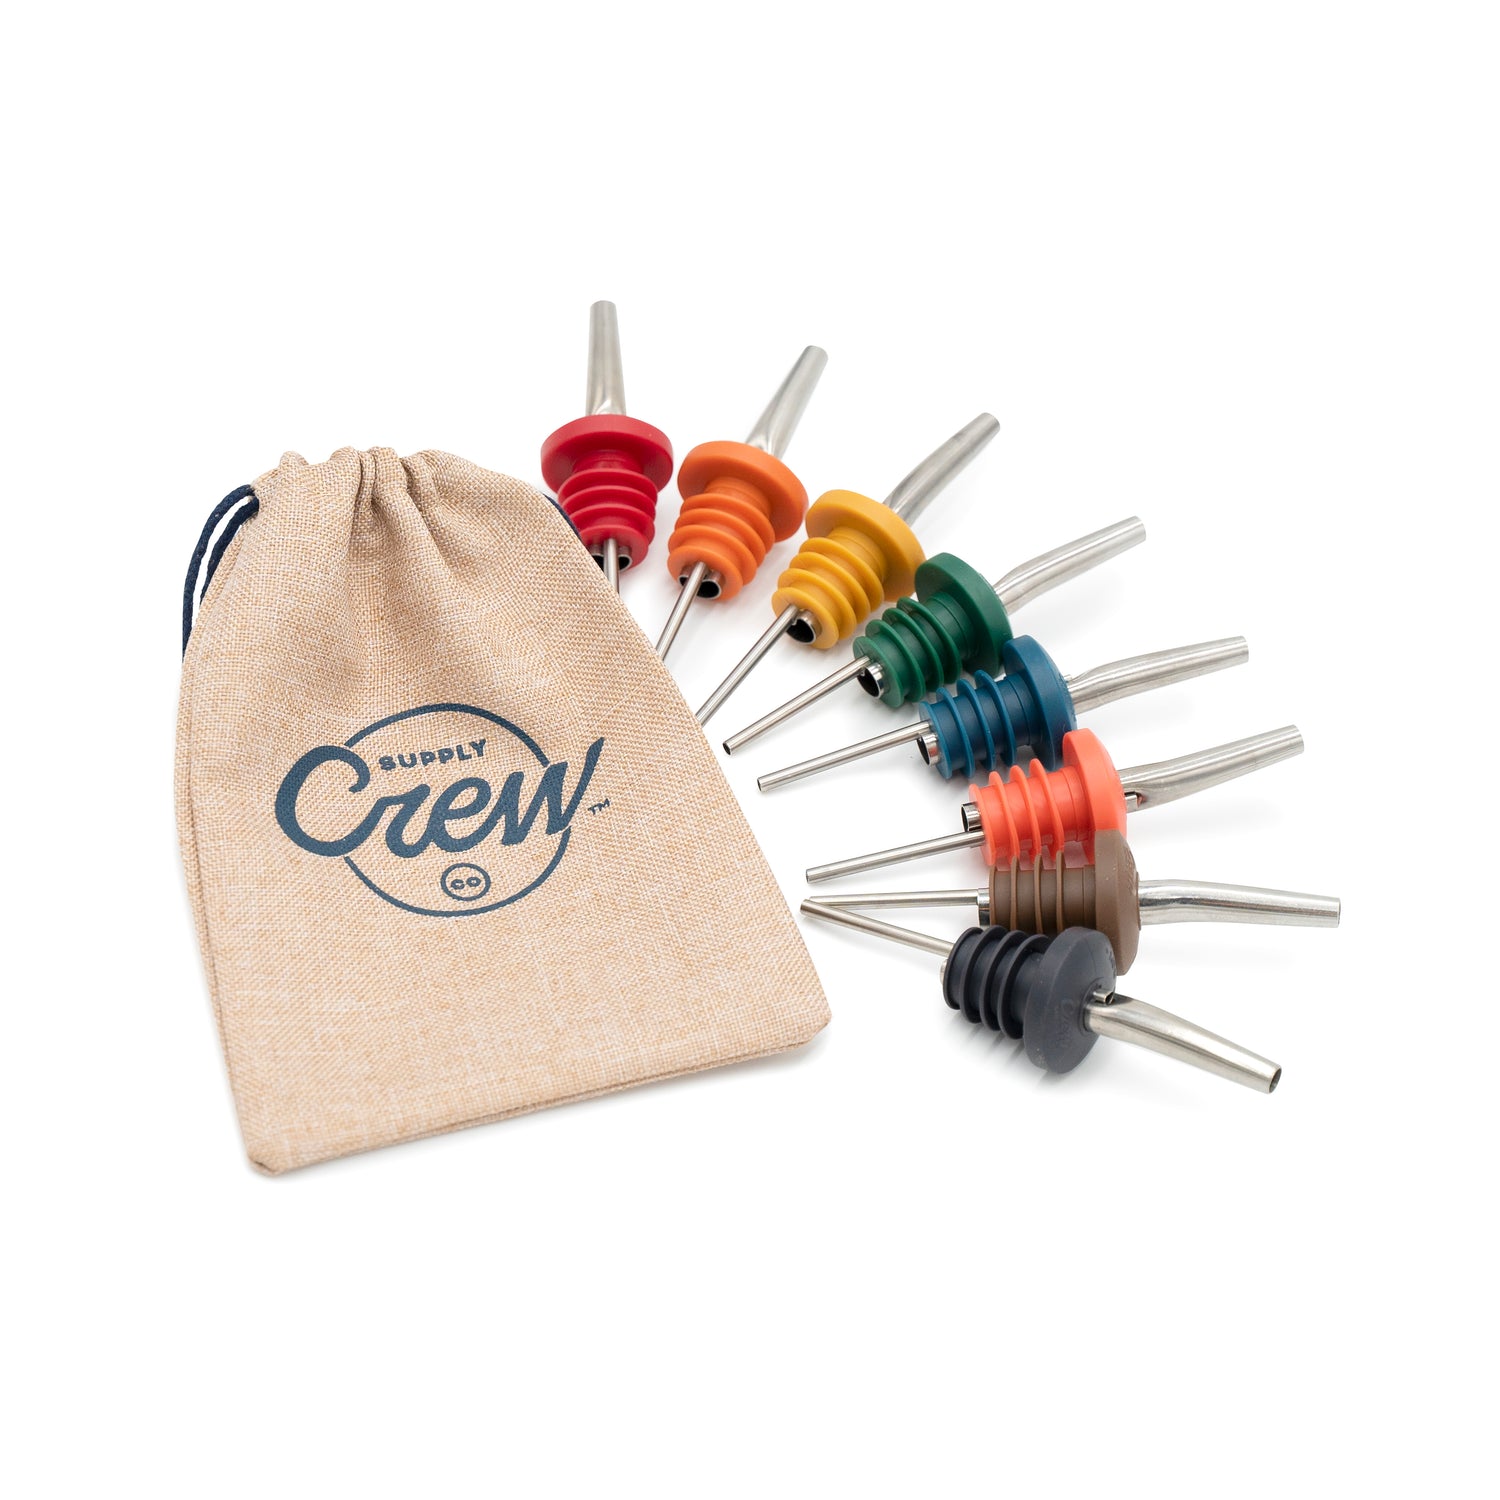 Crew Supply Co.  Bar Tools Made Better